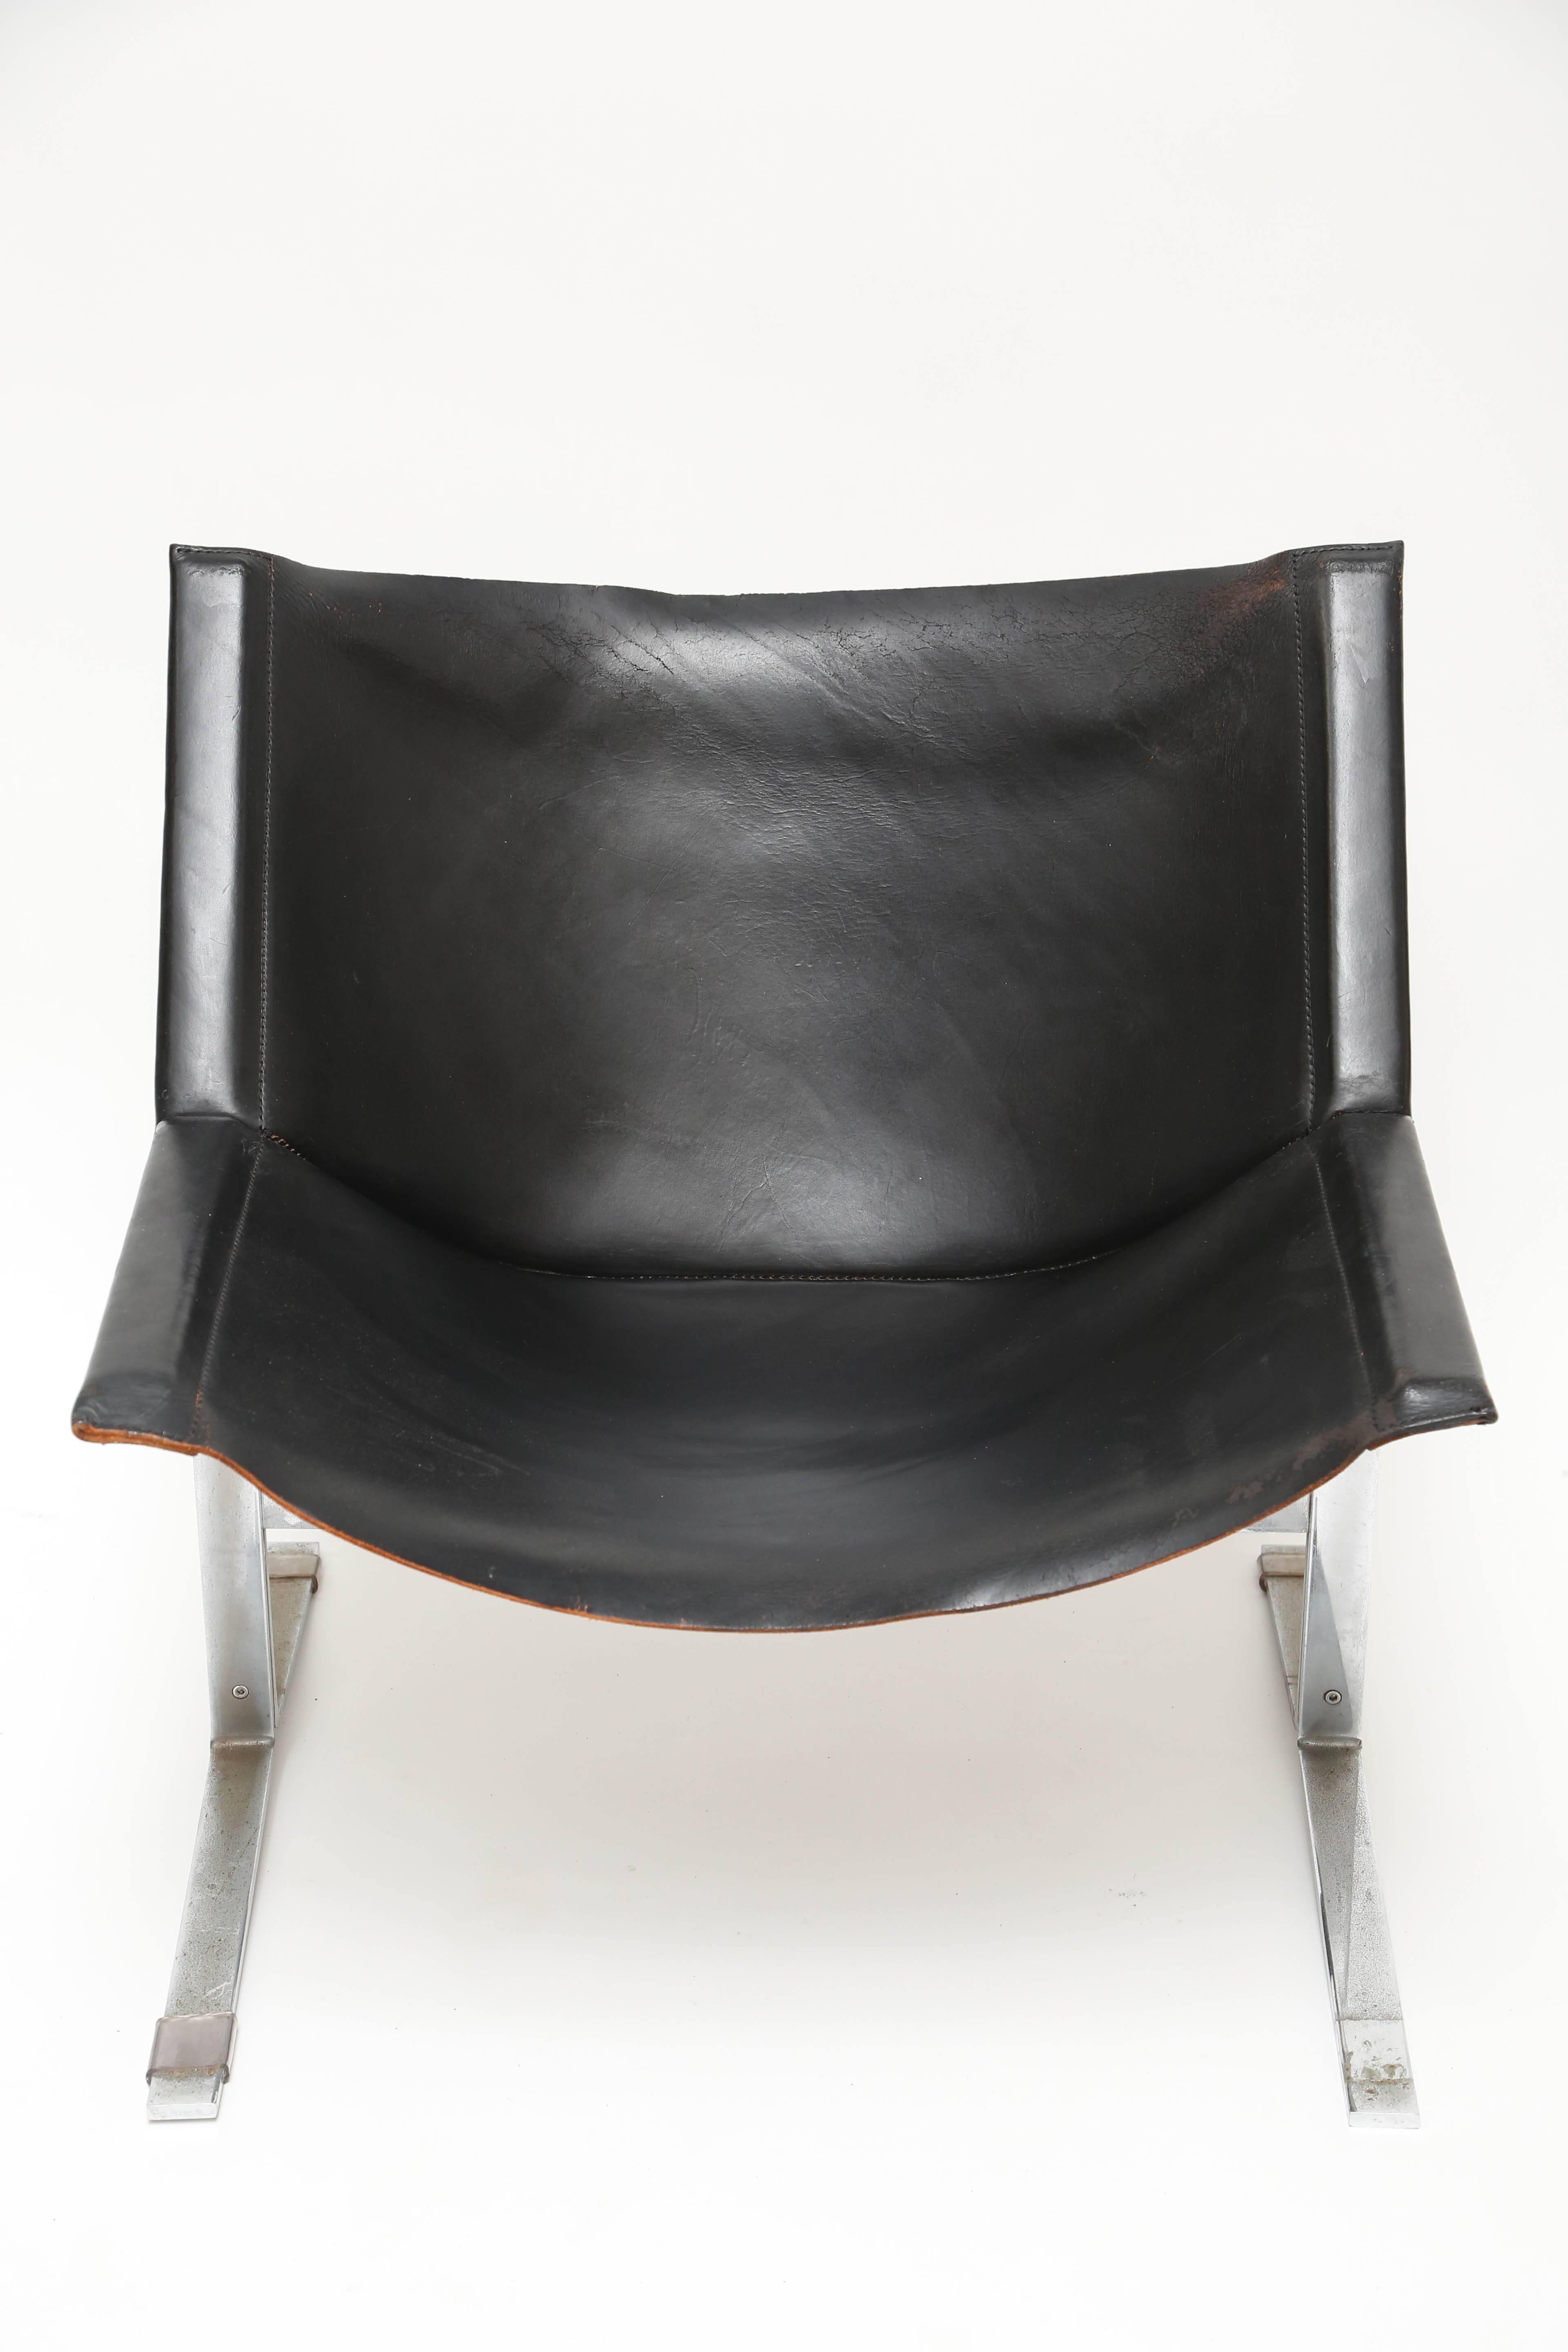 Meadmore chairs model #280 C. 1970
 